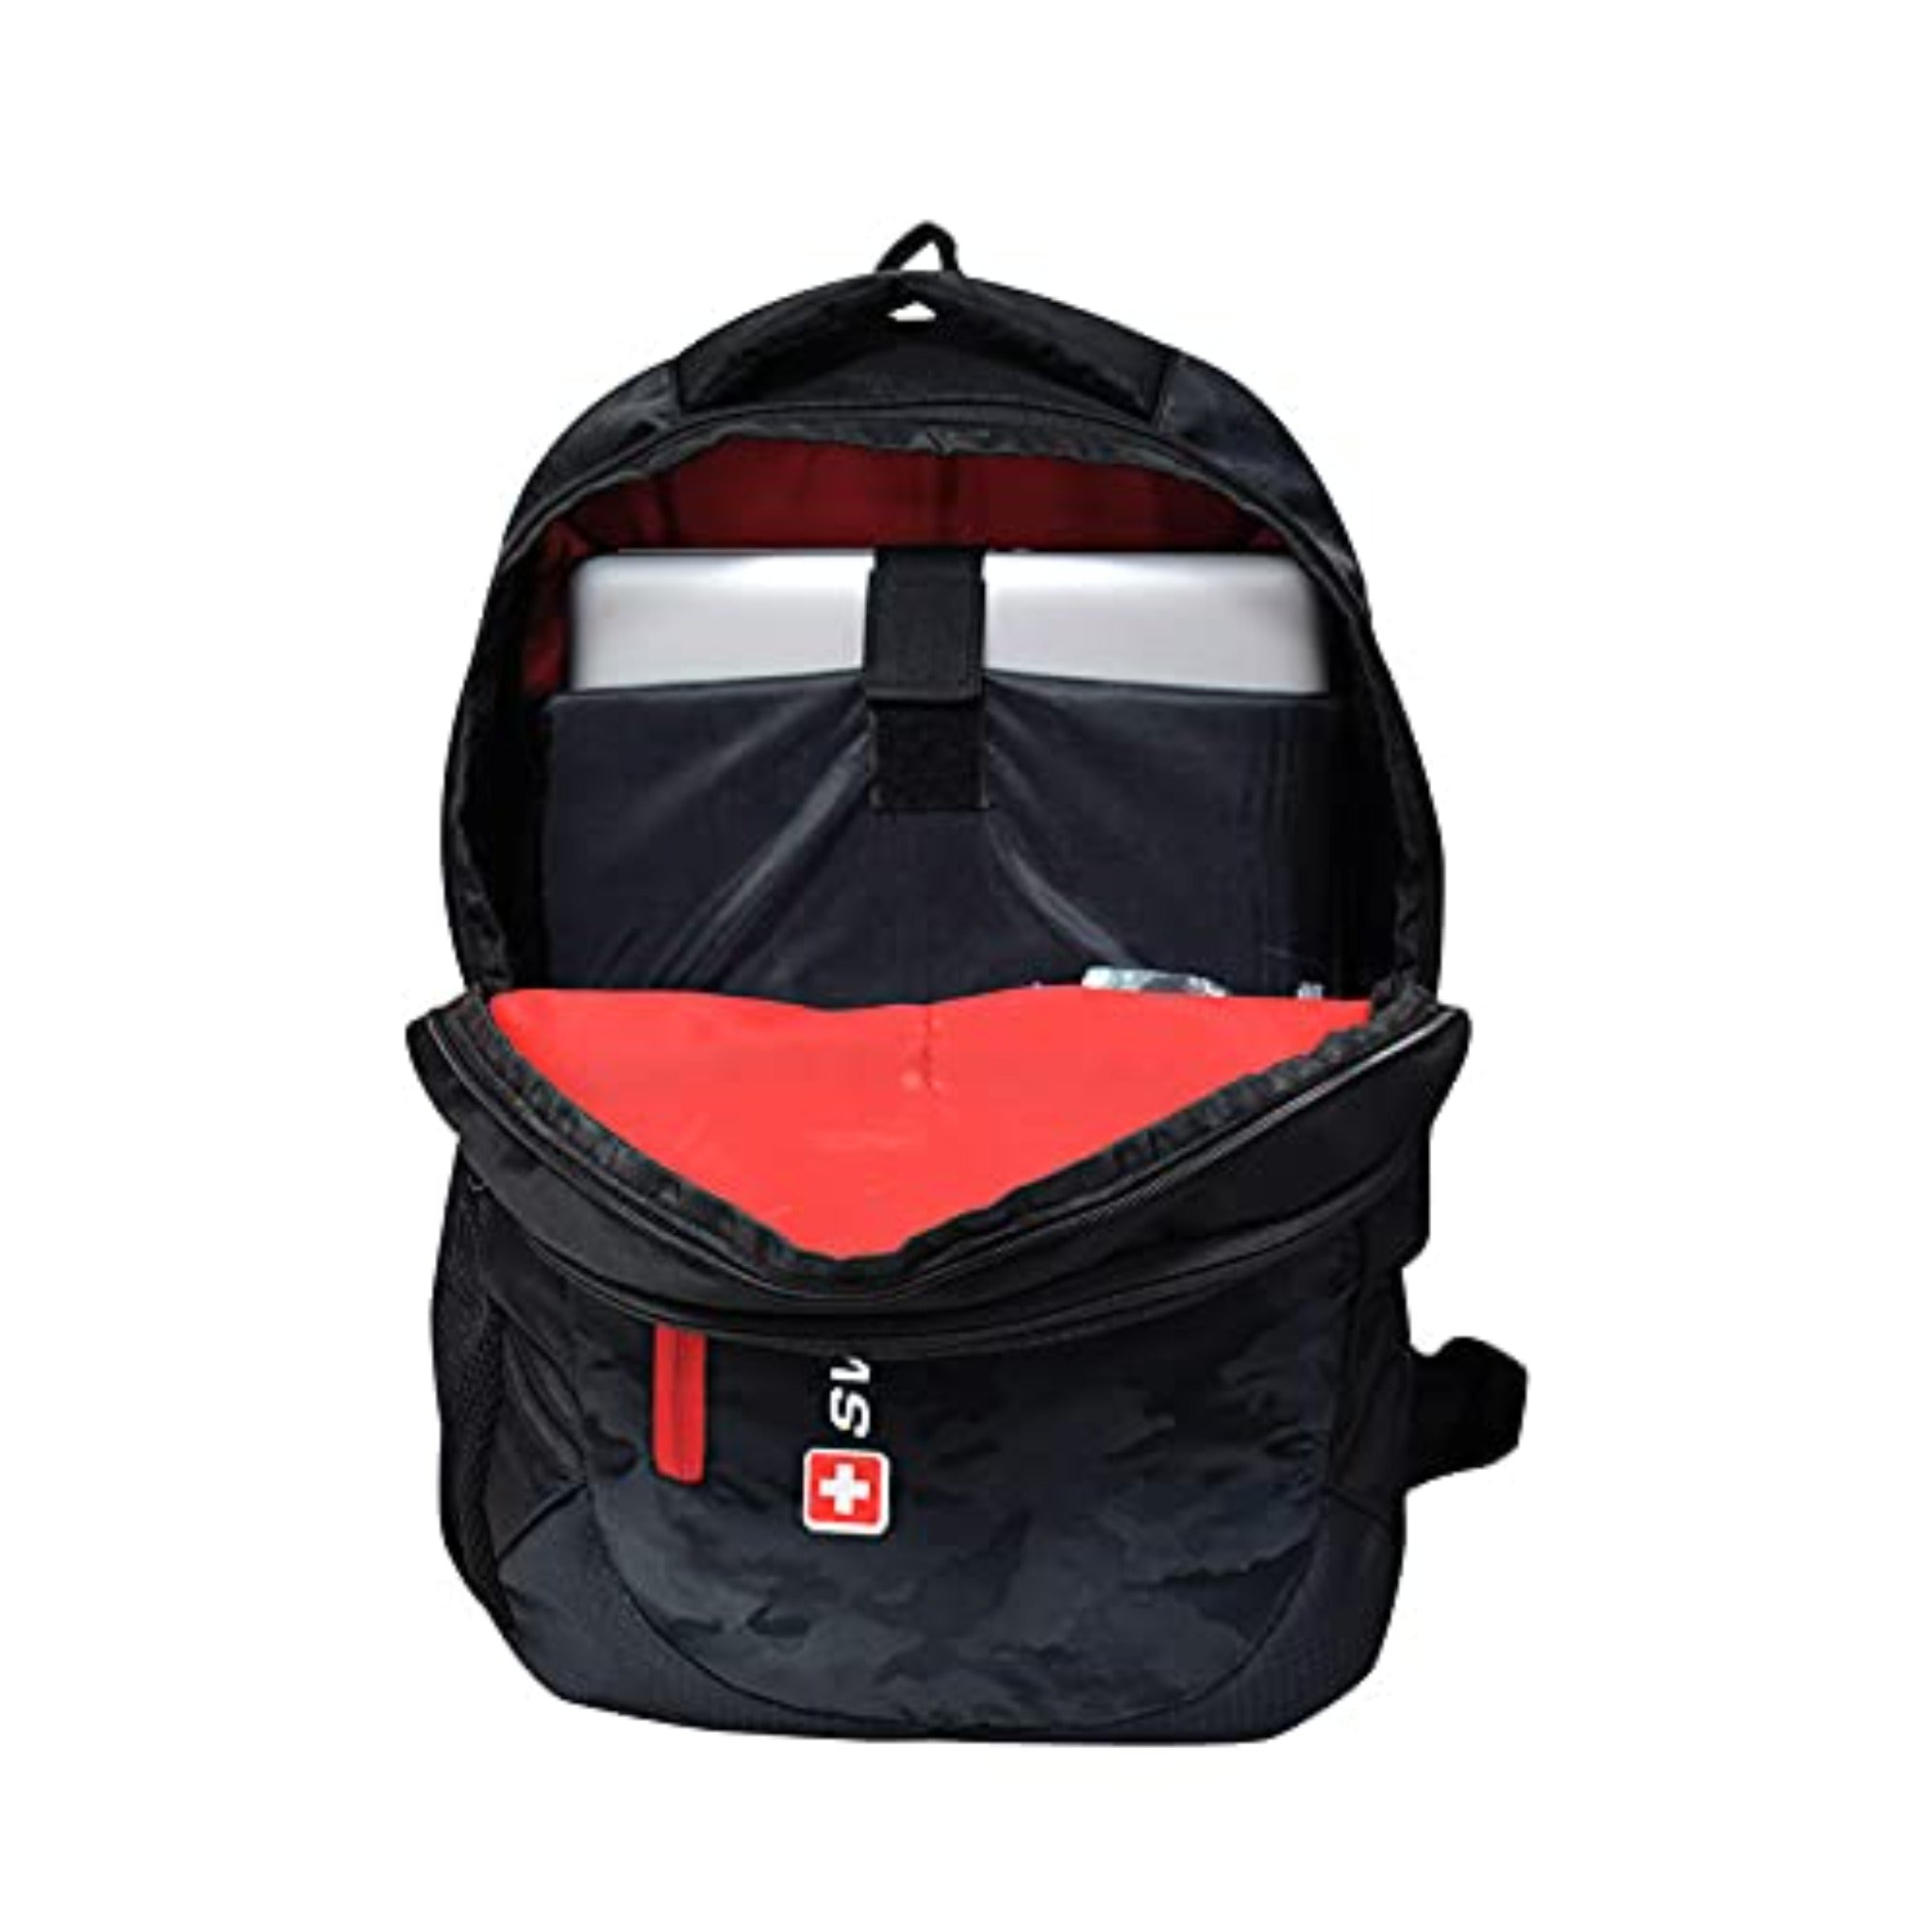 Swiss Military Laptop Backpack Lbp87